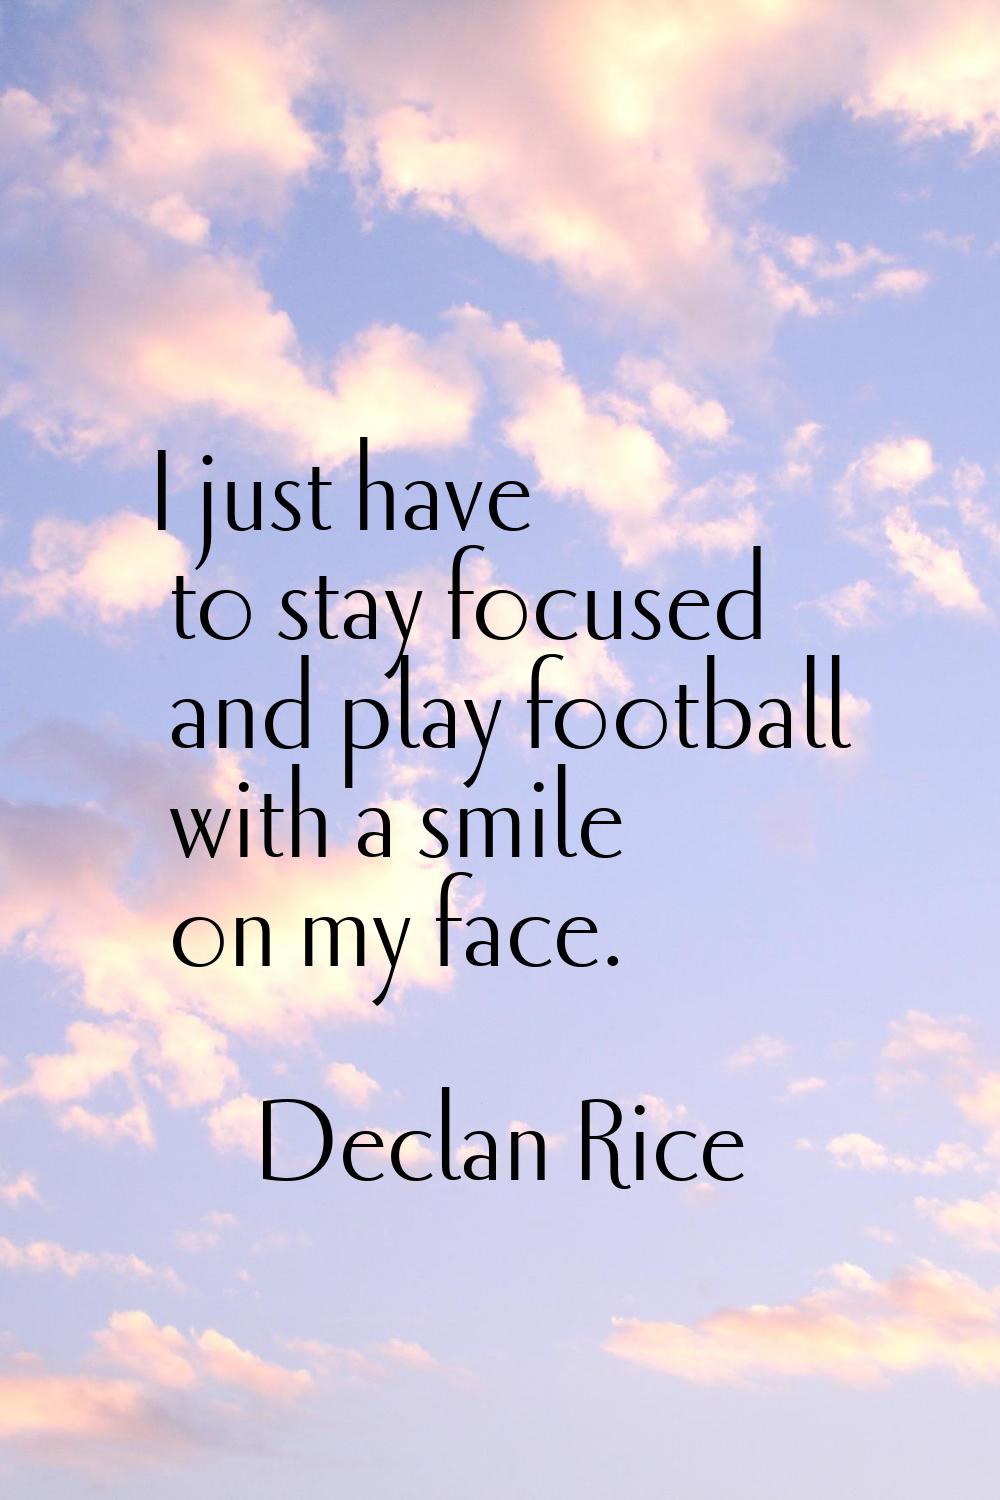 I just have to stay focused and play football with a smile on my face.